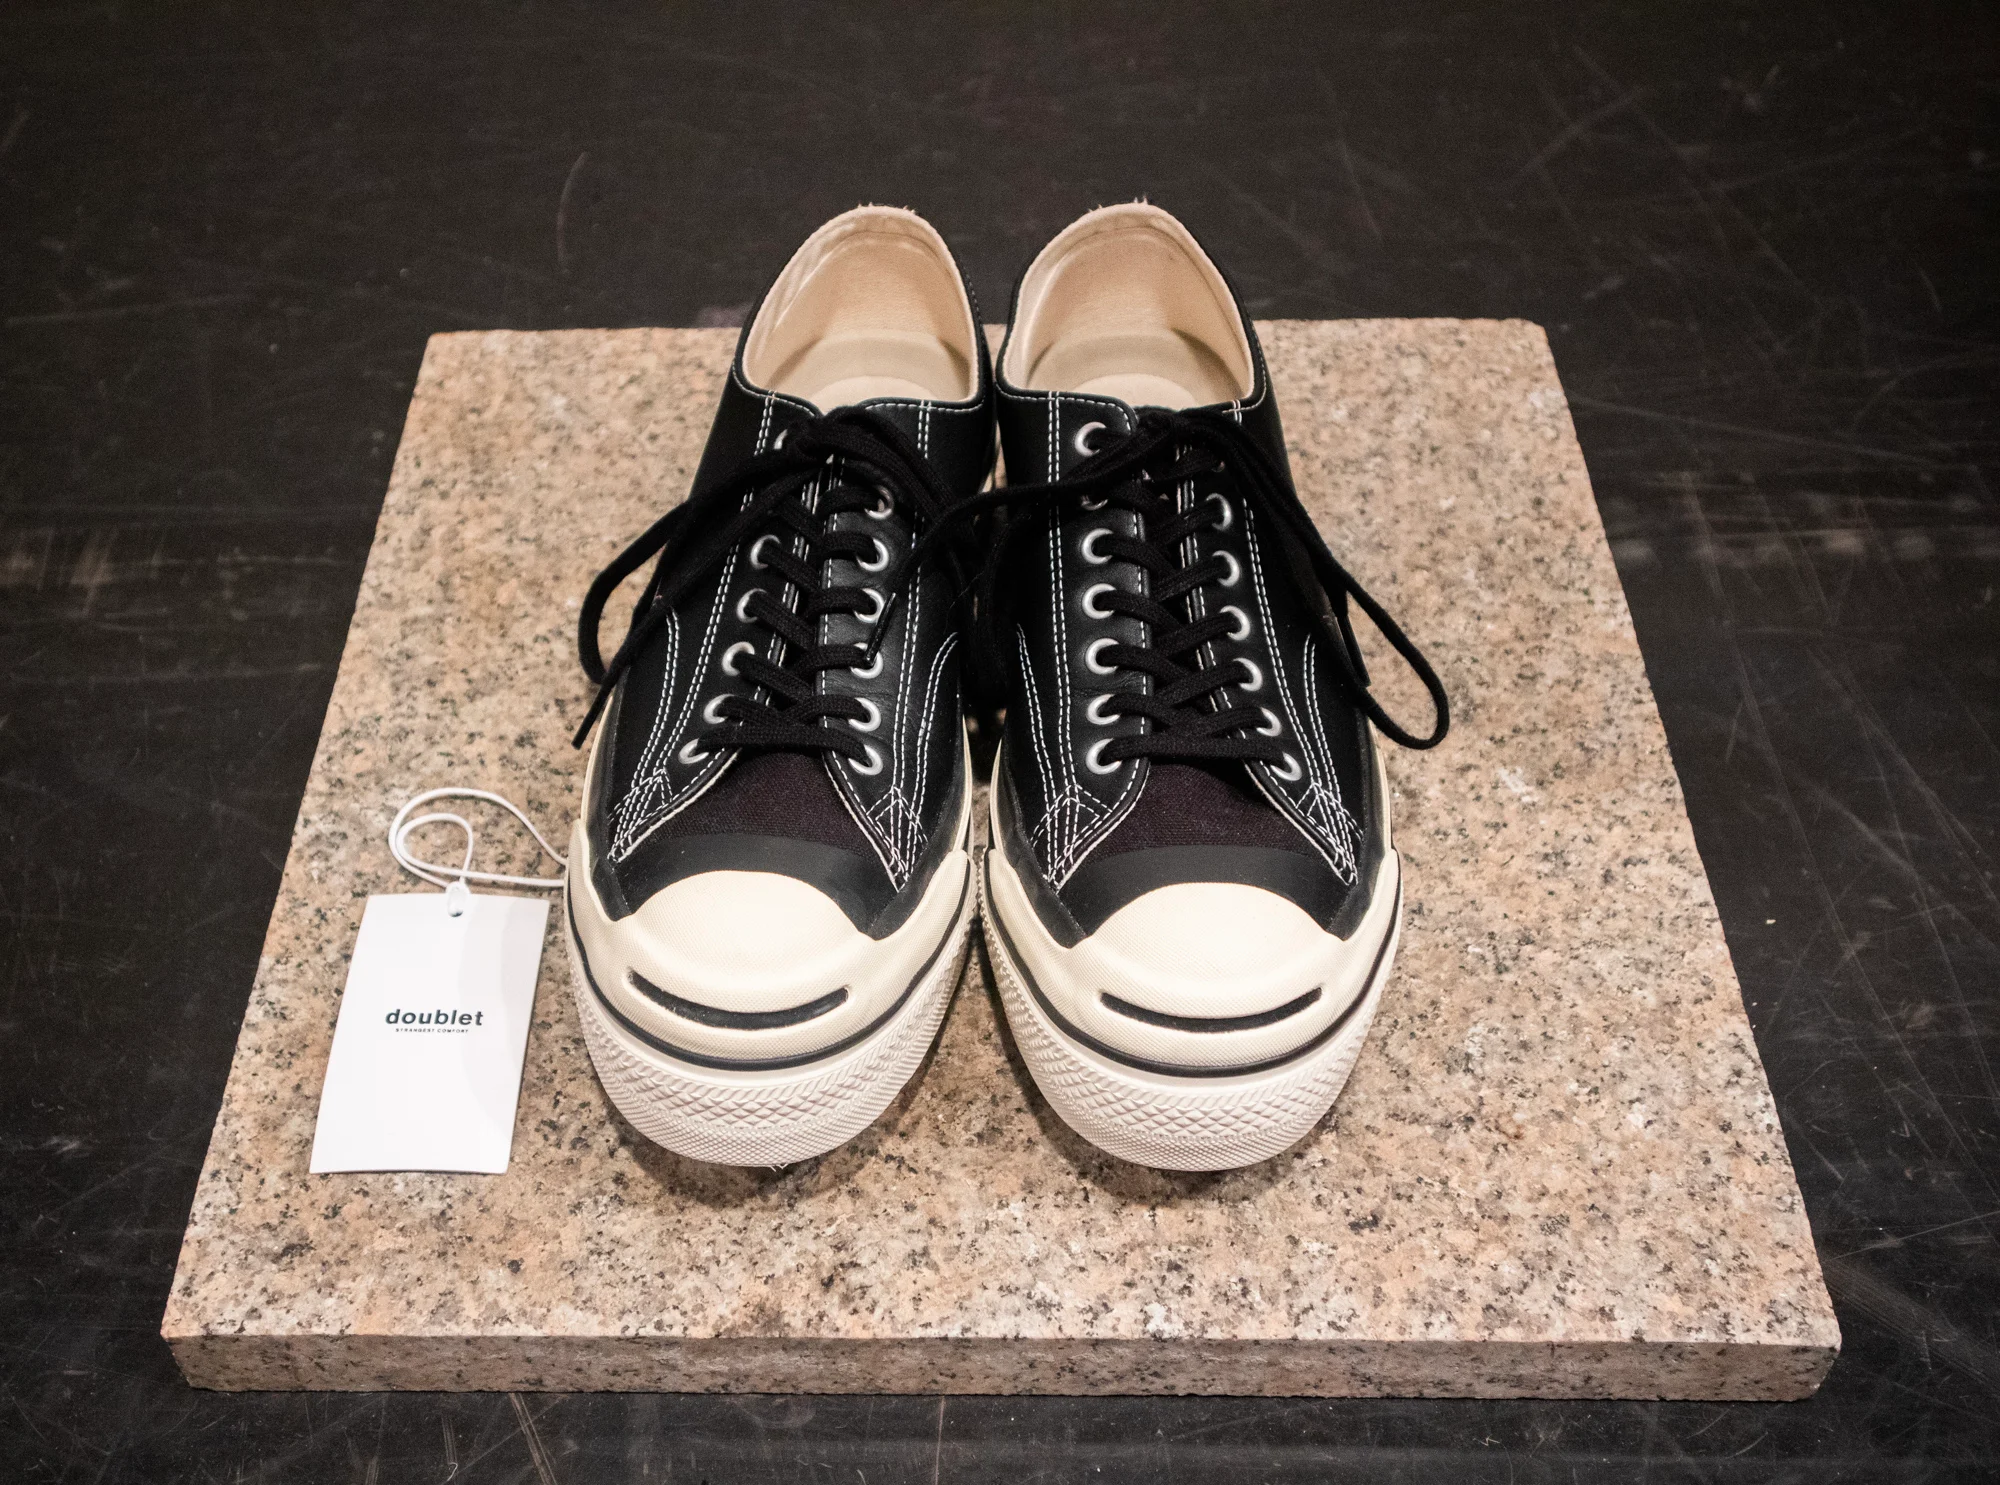 doublet x CONVERSE 初のスニーカー4月19日/4月26日発売予定